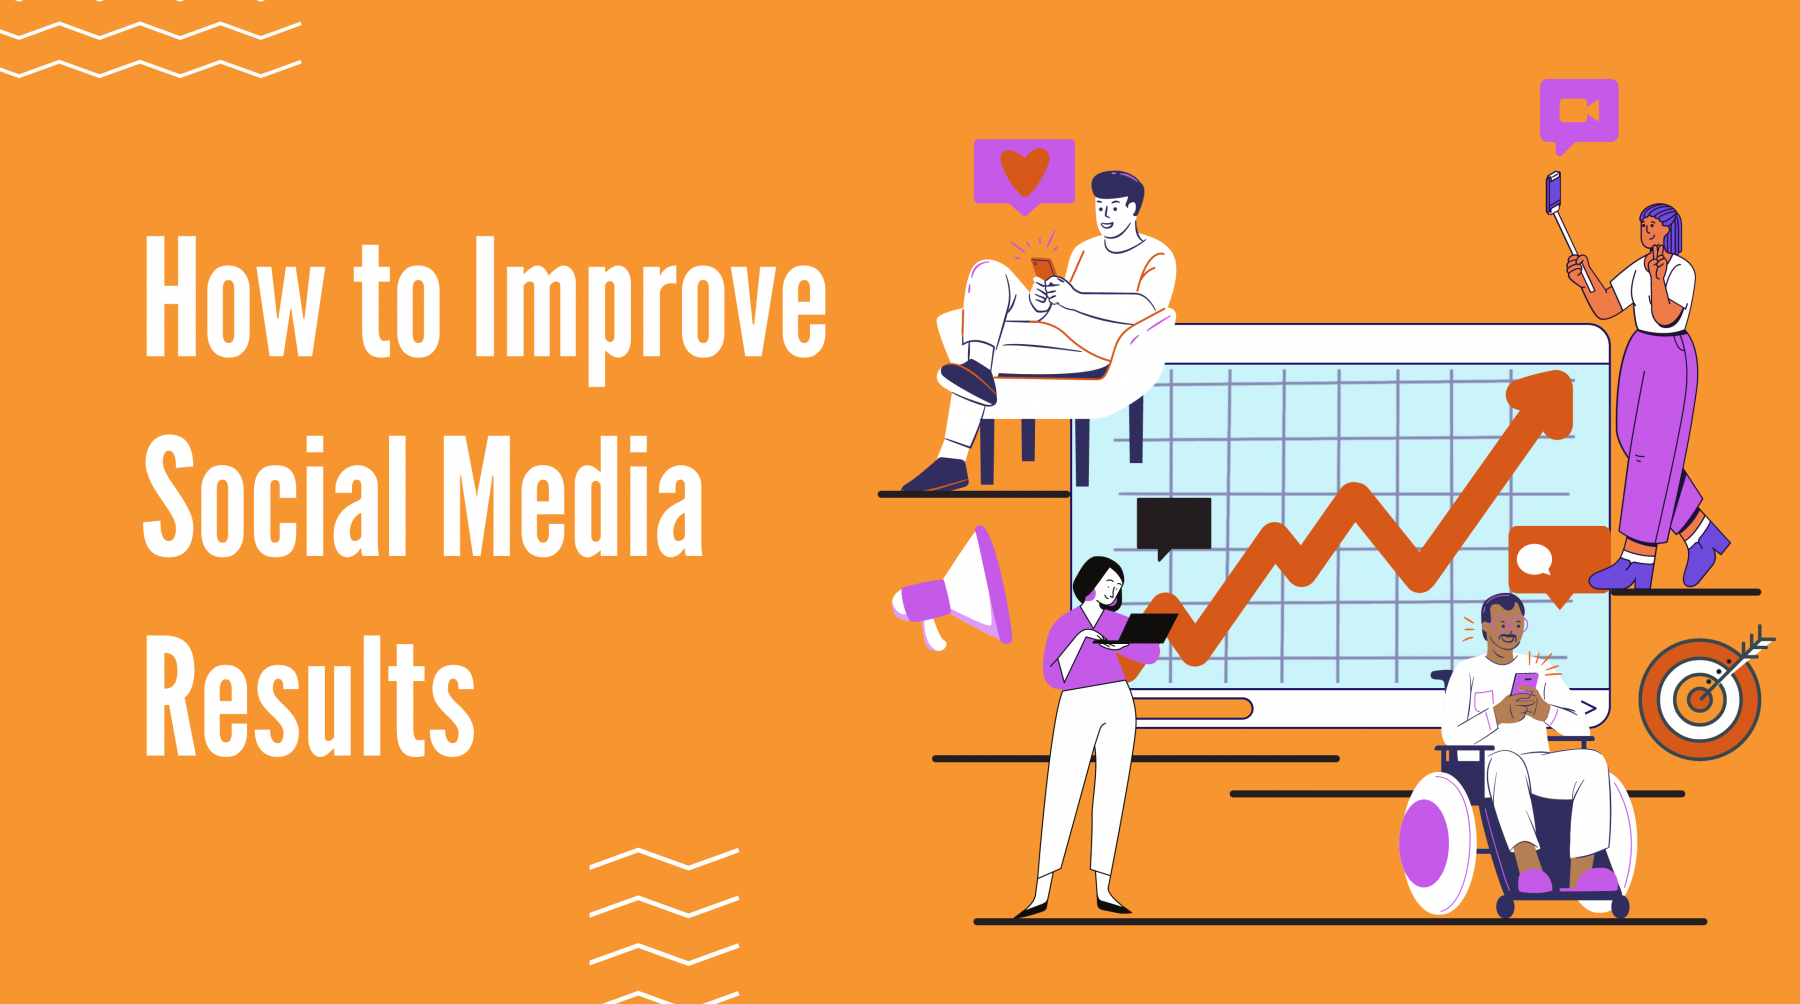 How to Improve Social Media Results